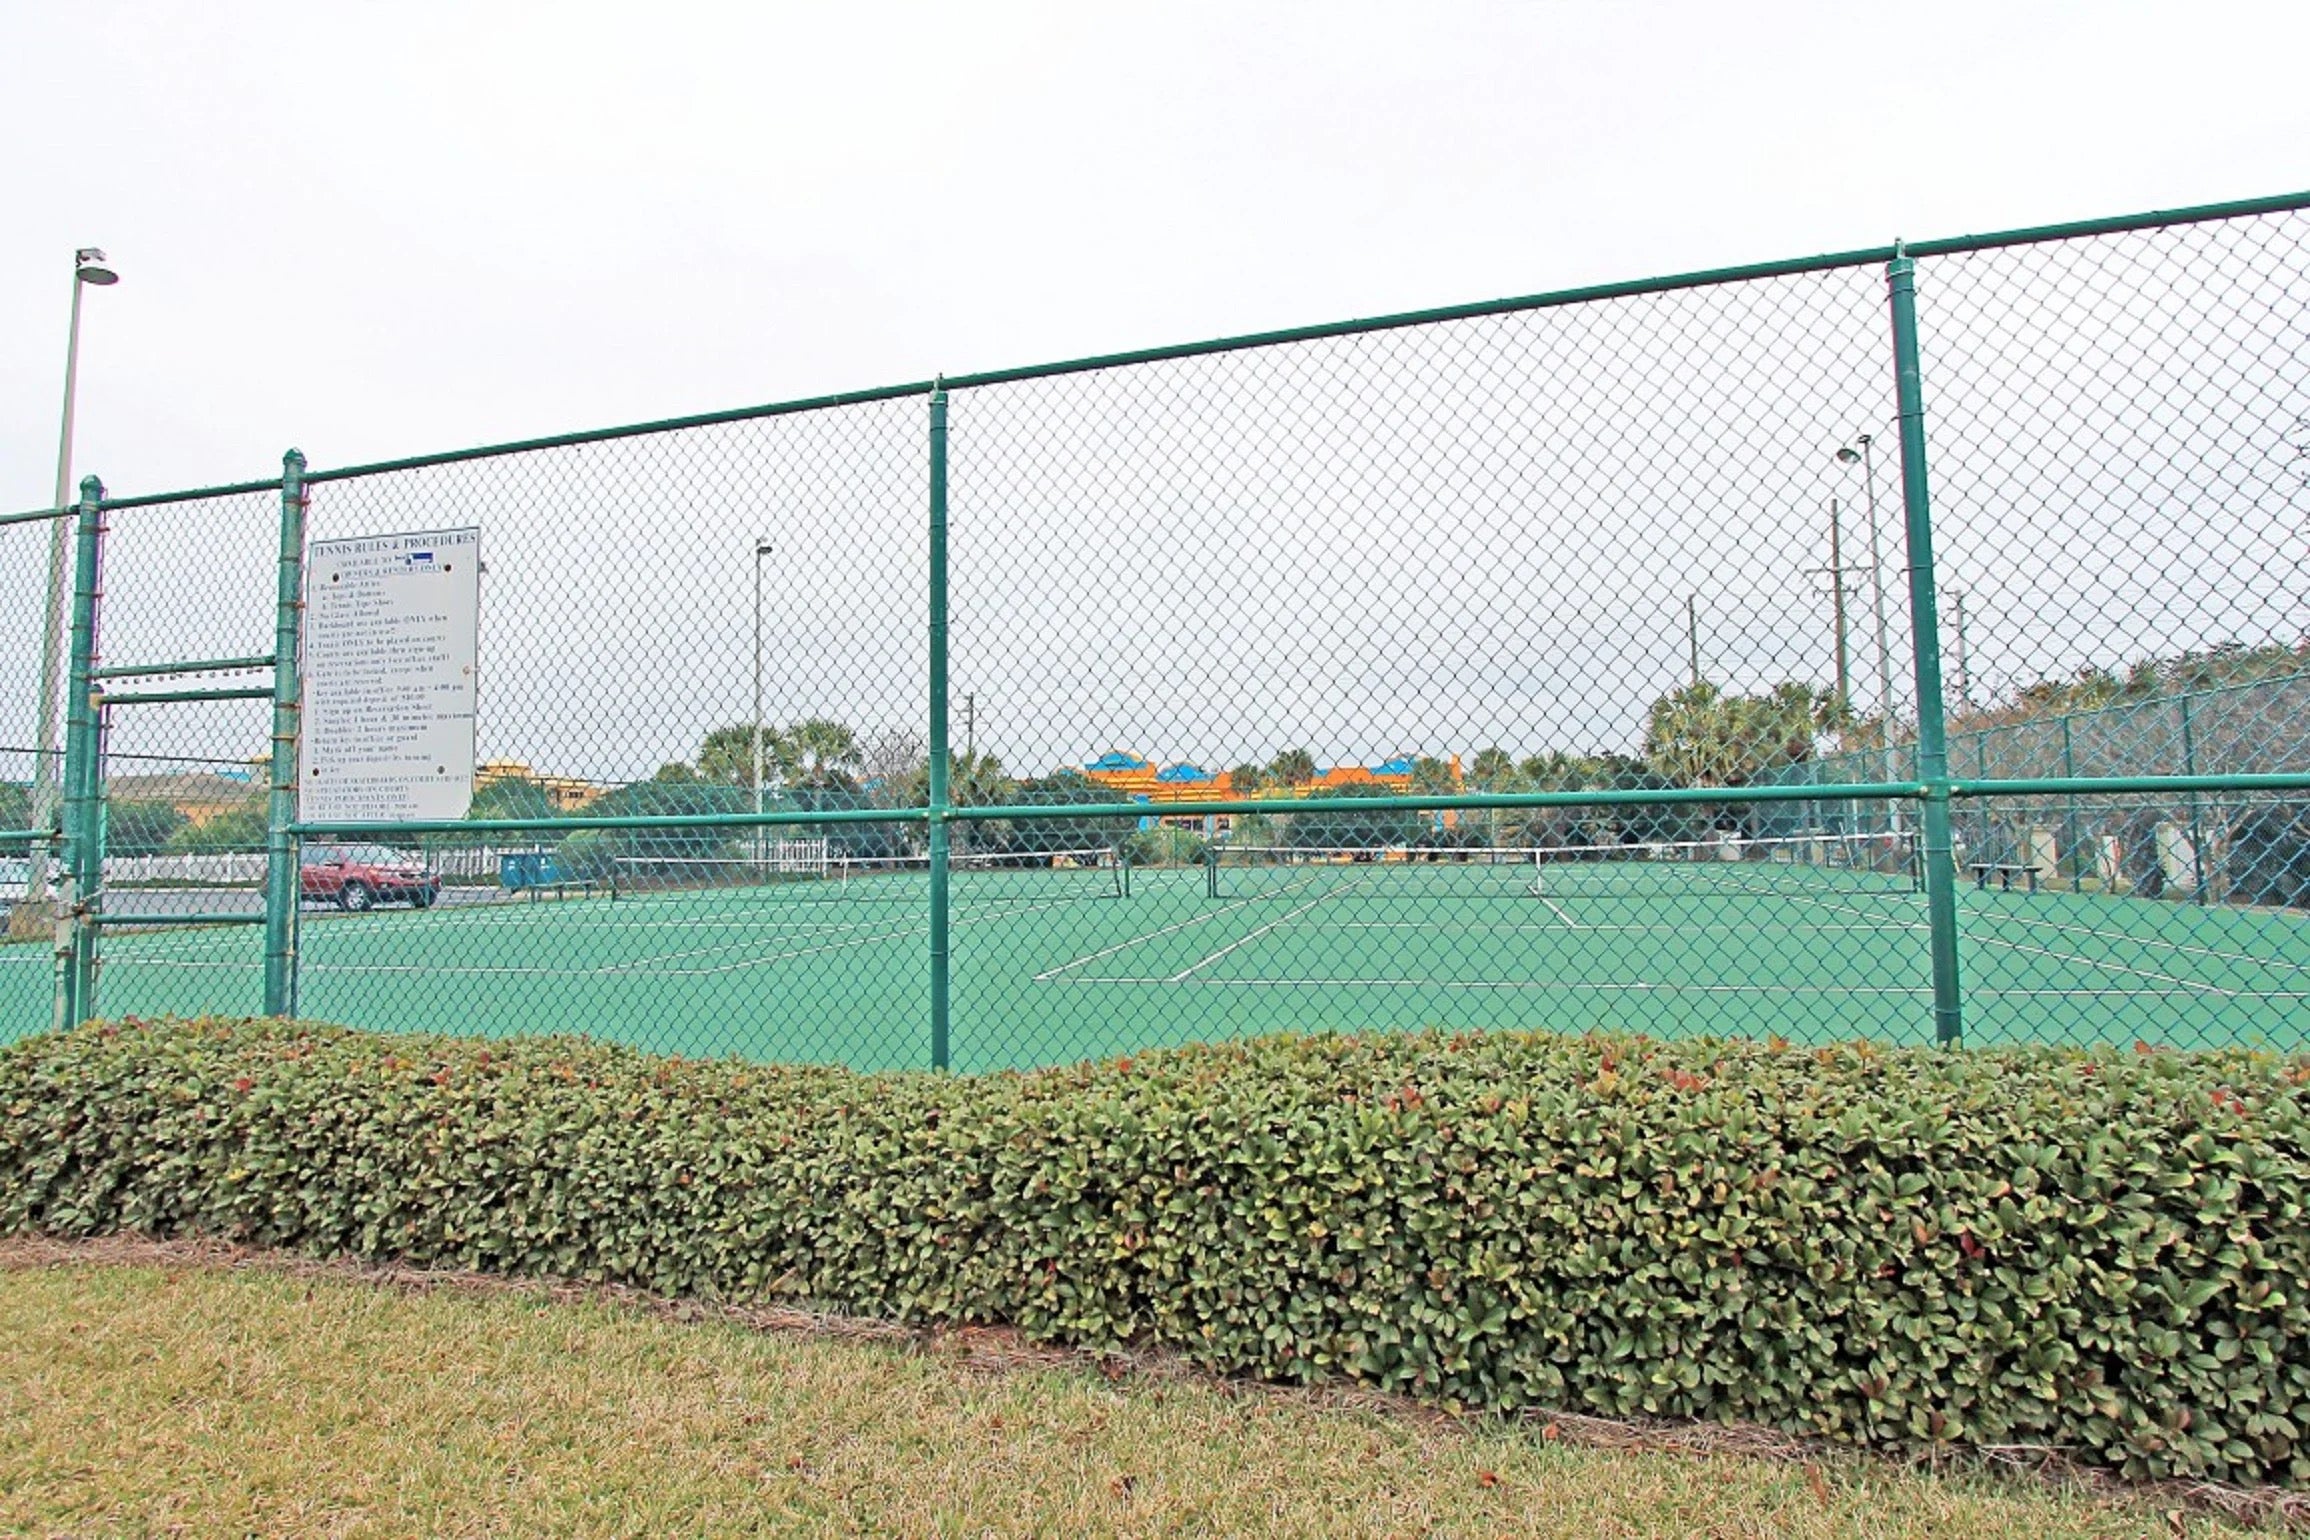 Lighted Tennis Courts 